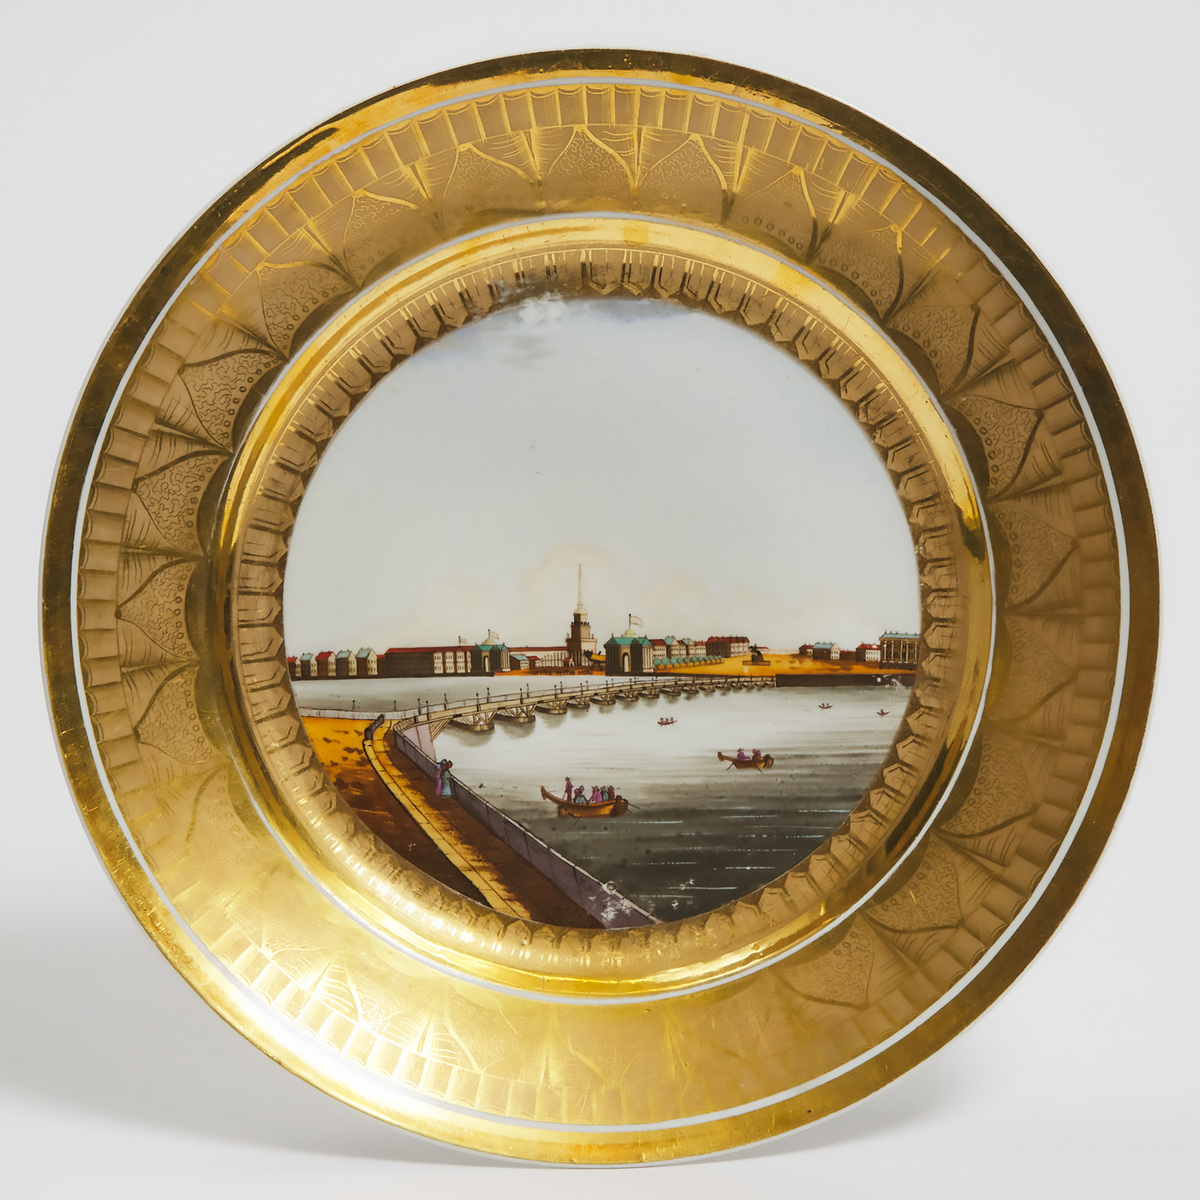 Russian Porcelain Topographical Plate, 19th century, diameter 9.8 in — 25 cm